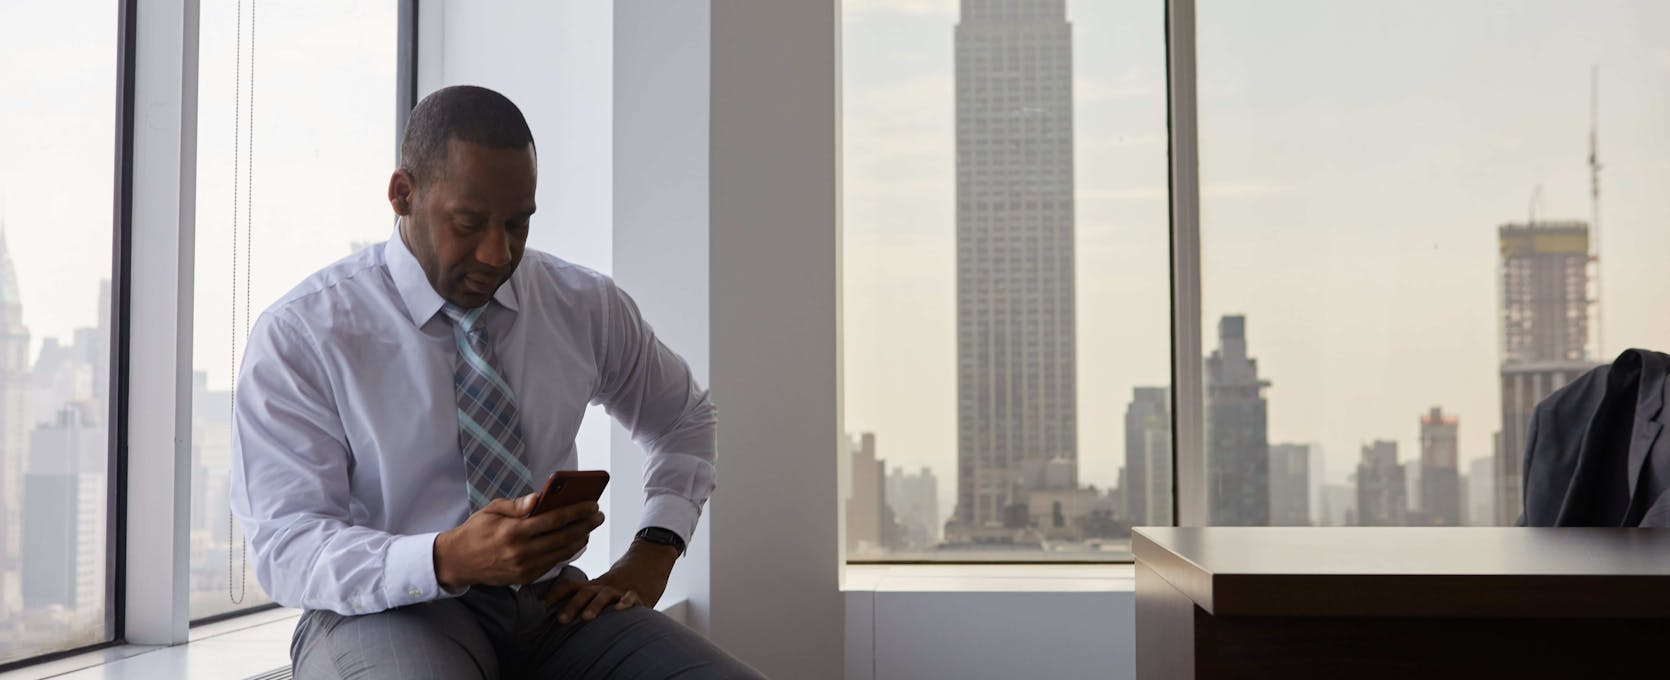 Man sitting at the window in his office while looking at his phone